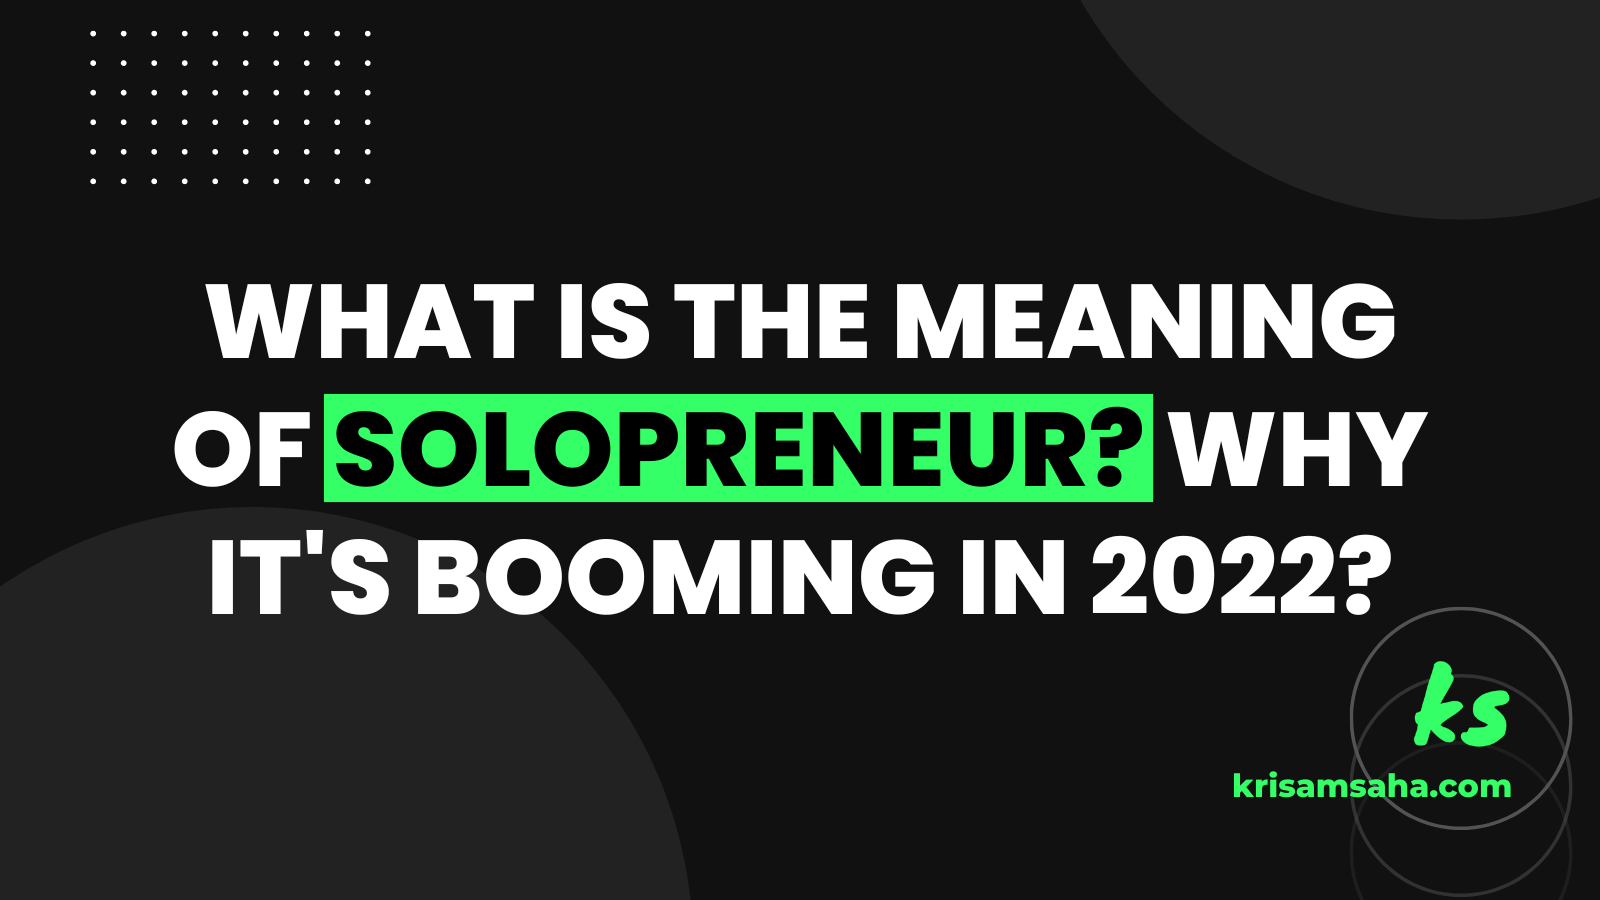 You are currently viewing What is the meaning of solopreneur? Why it’s booming in 2022?